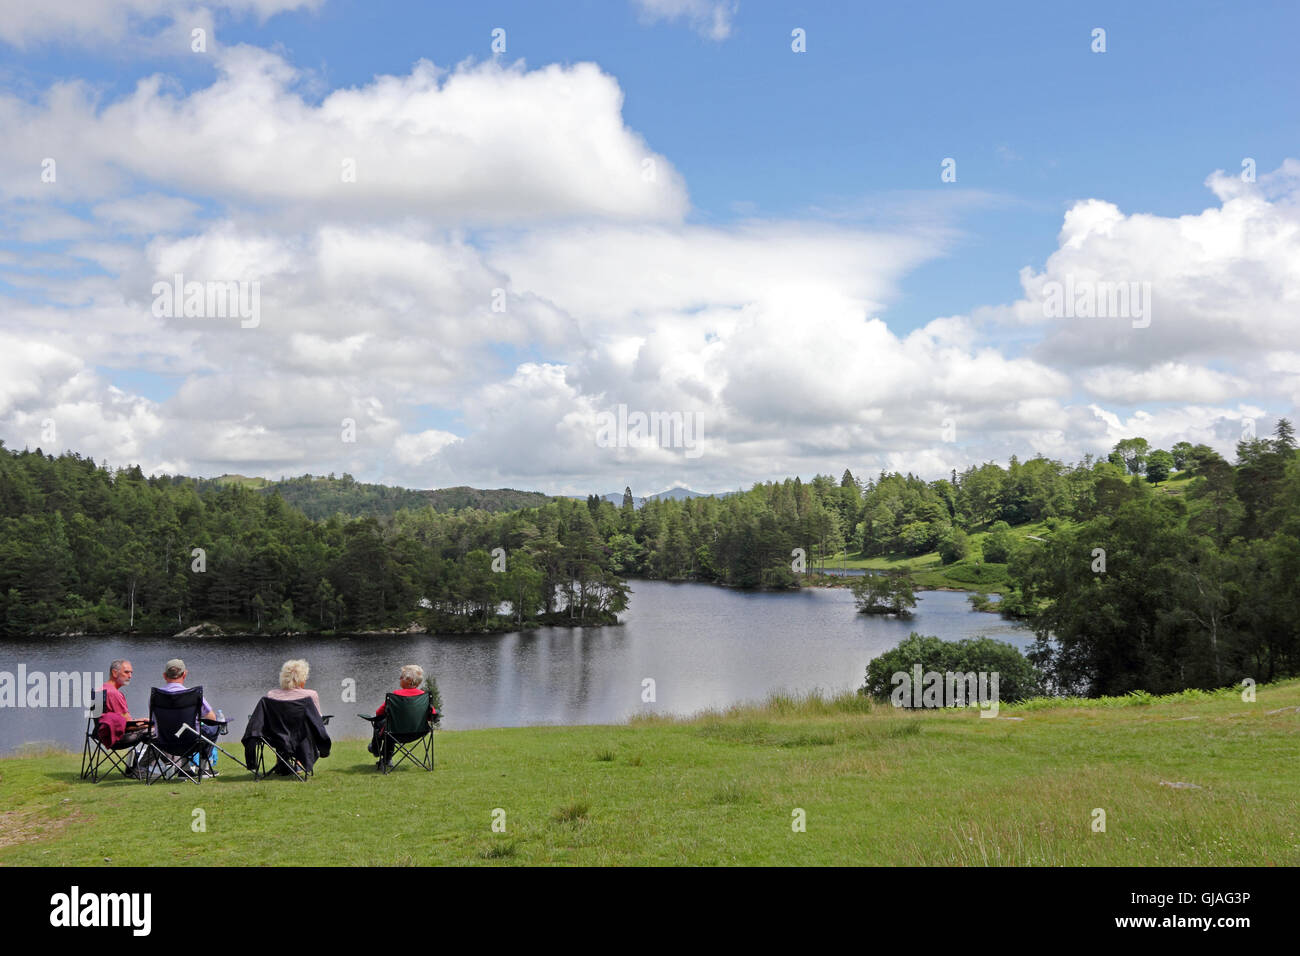 4 middle aged people admiring the view at Tarn Hows, Cumbria Stock Photo